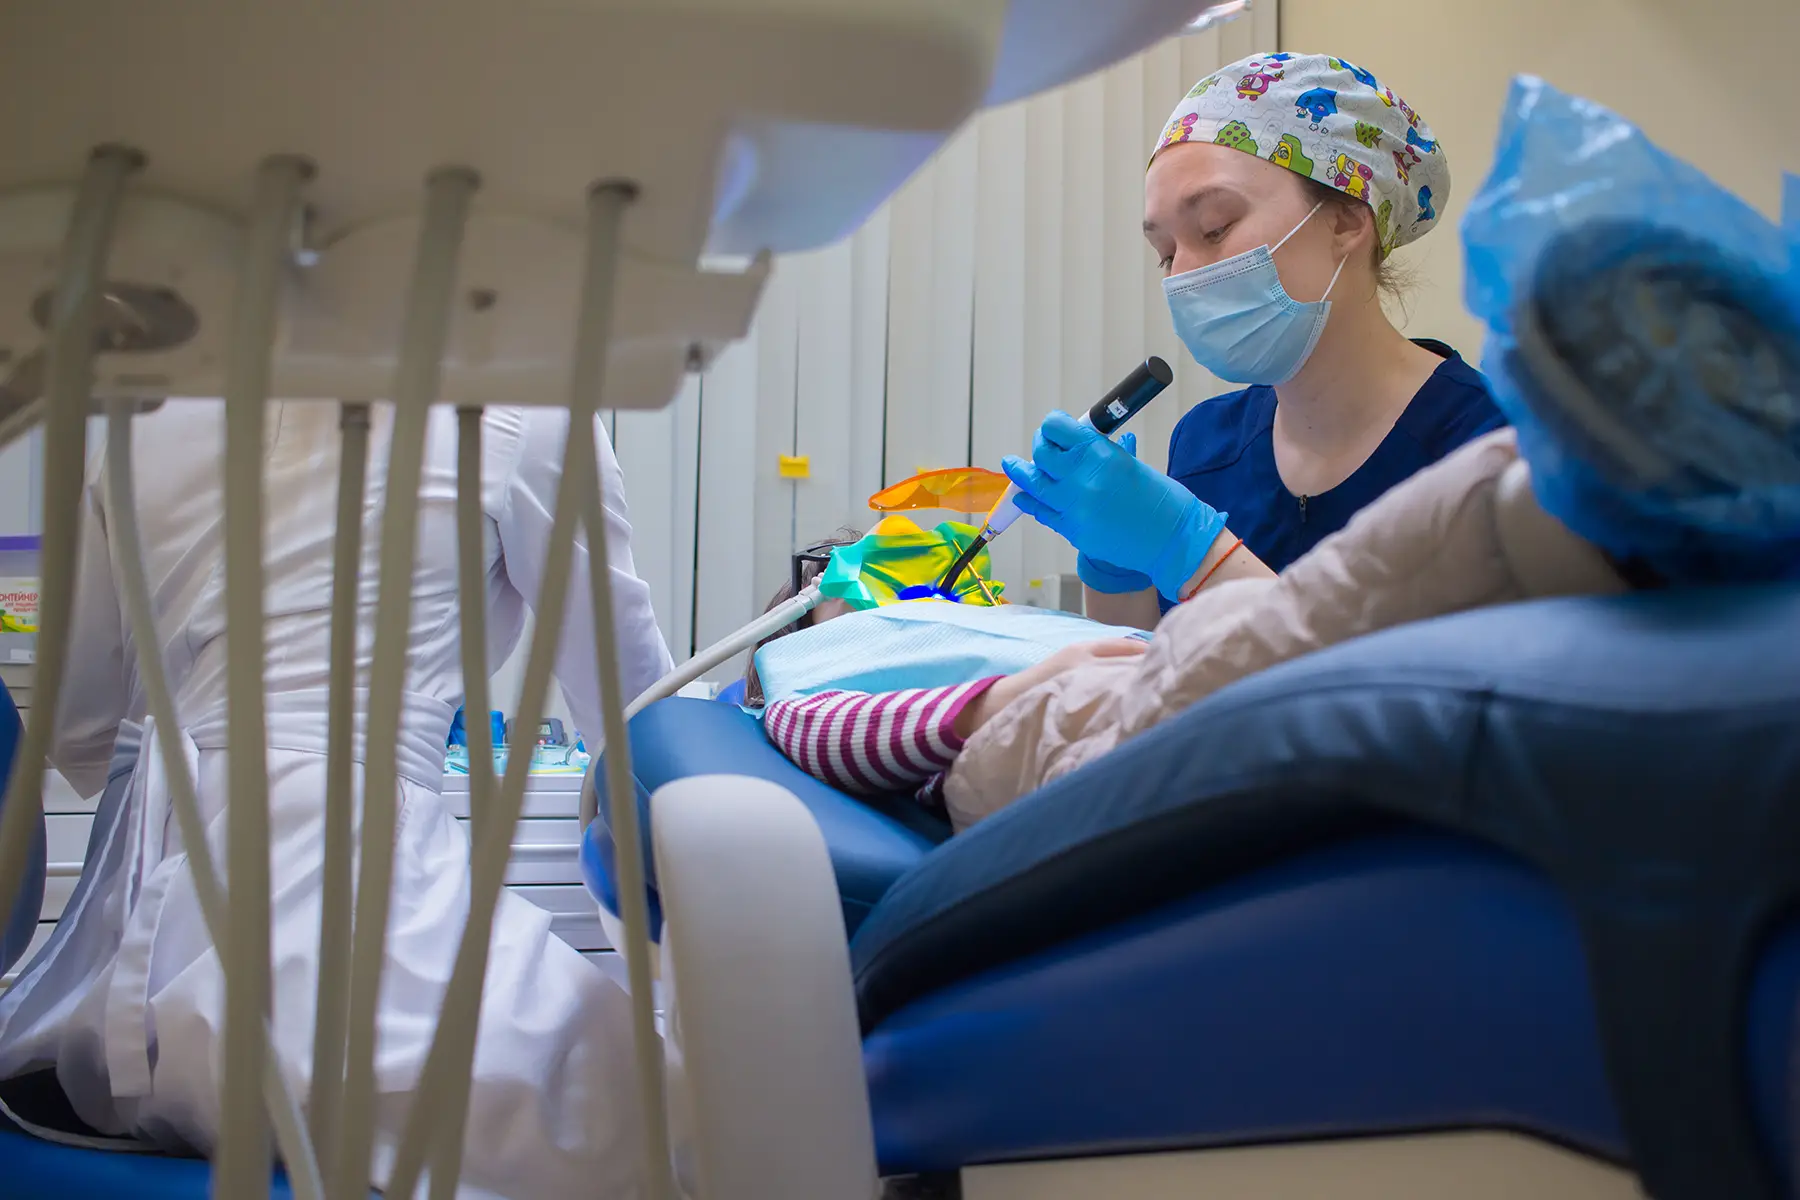 A child receiving dental treatment in Russia